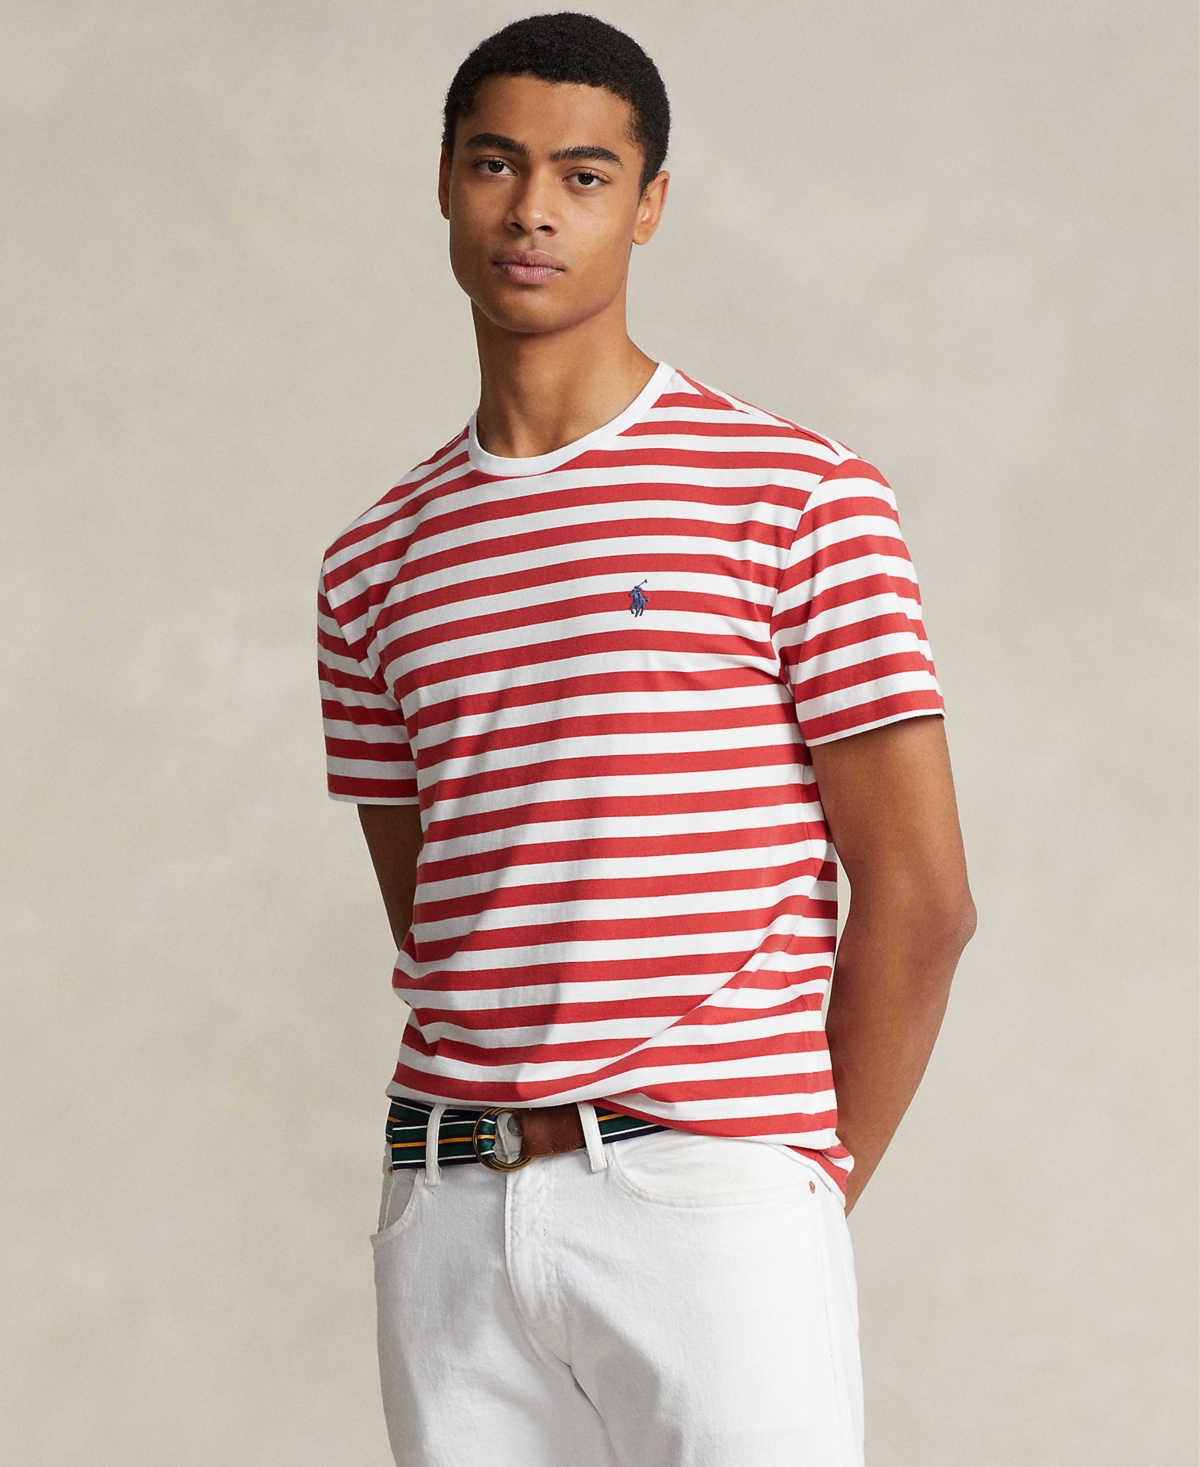 Polo Ralph Lauren Men's Striped Jersey Crewneck T-shirt In Post Red,white